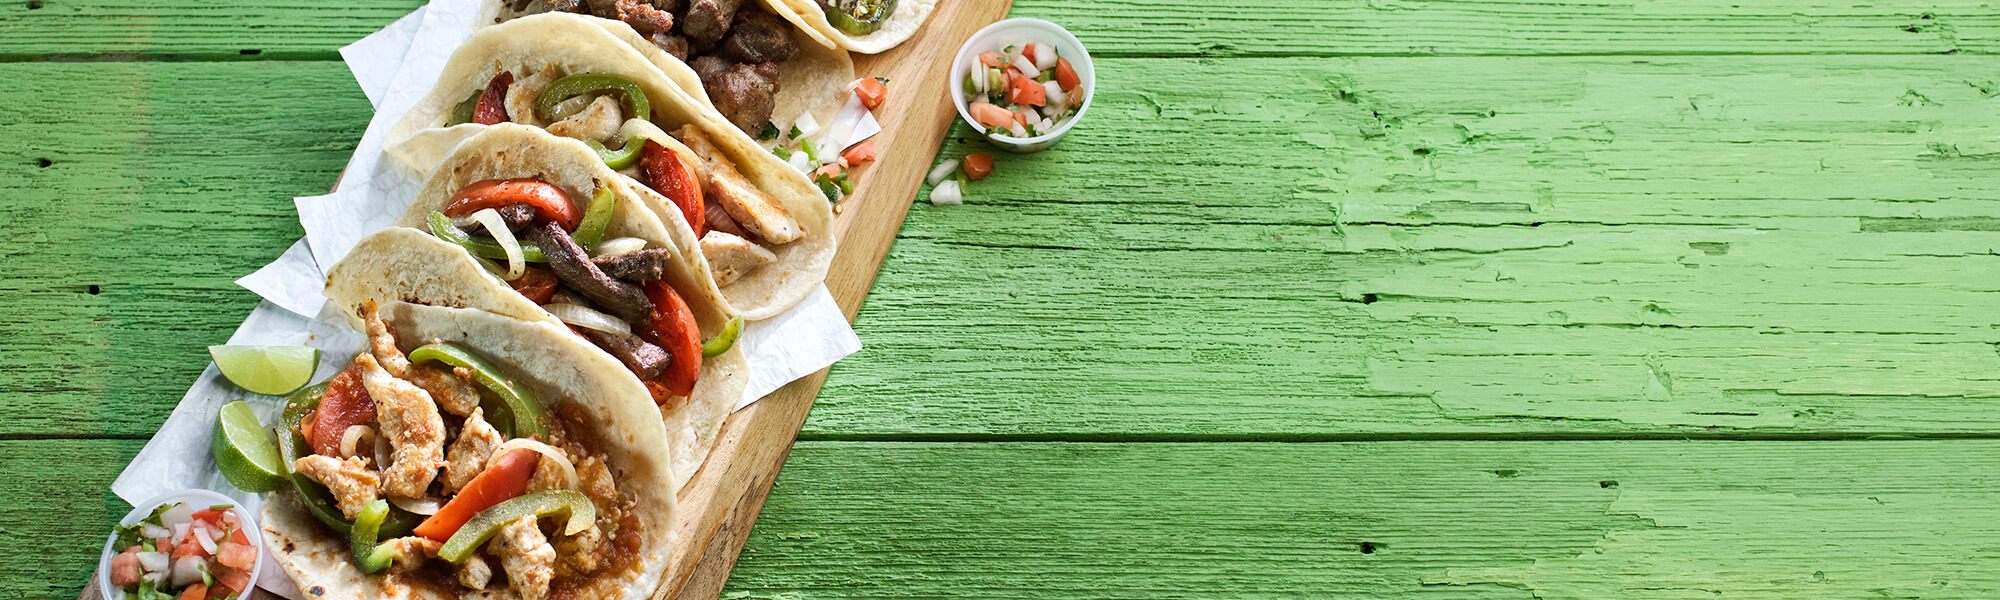 Lunch and Dinner Tacos on Wooden Board